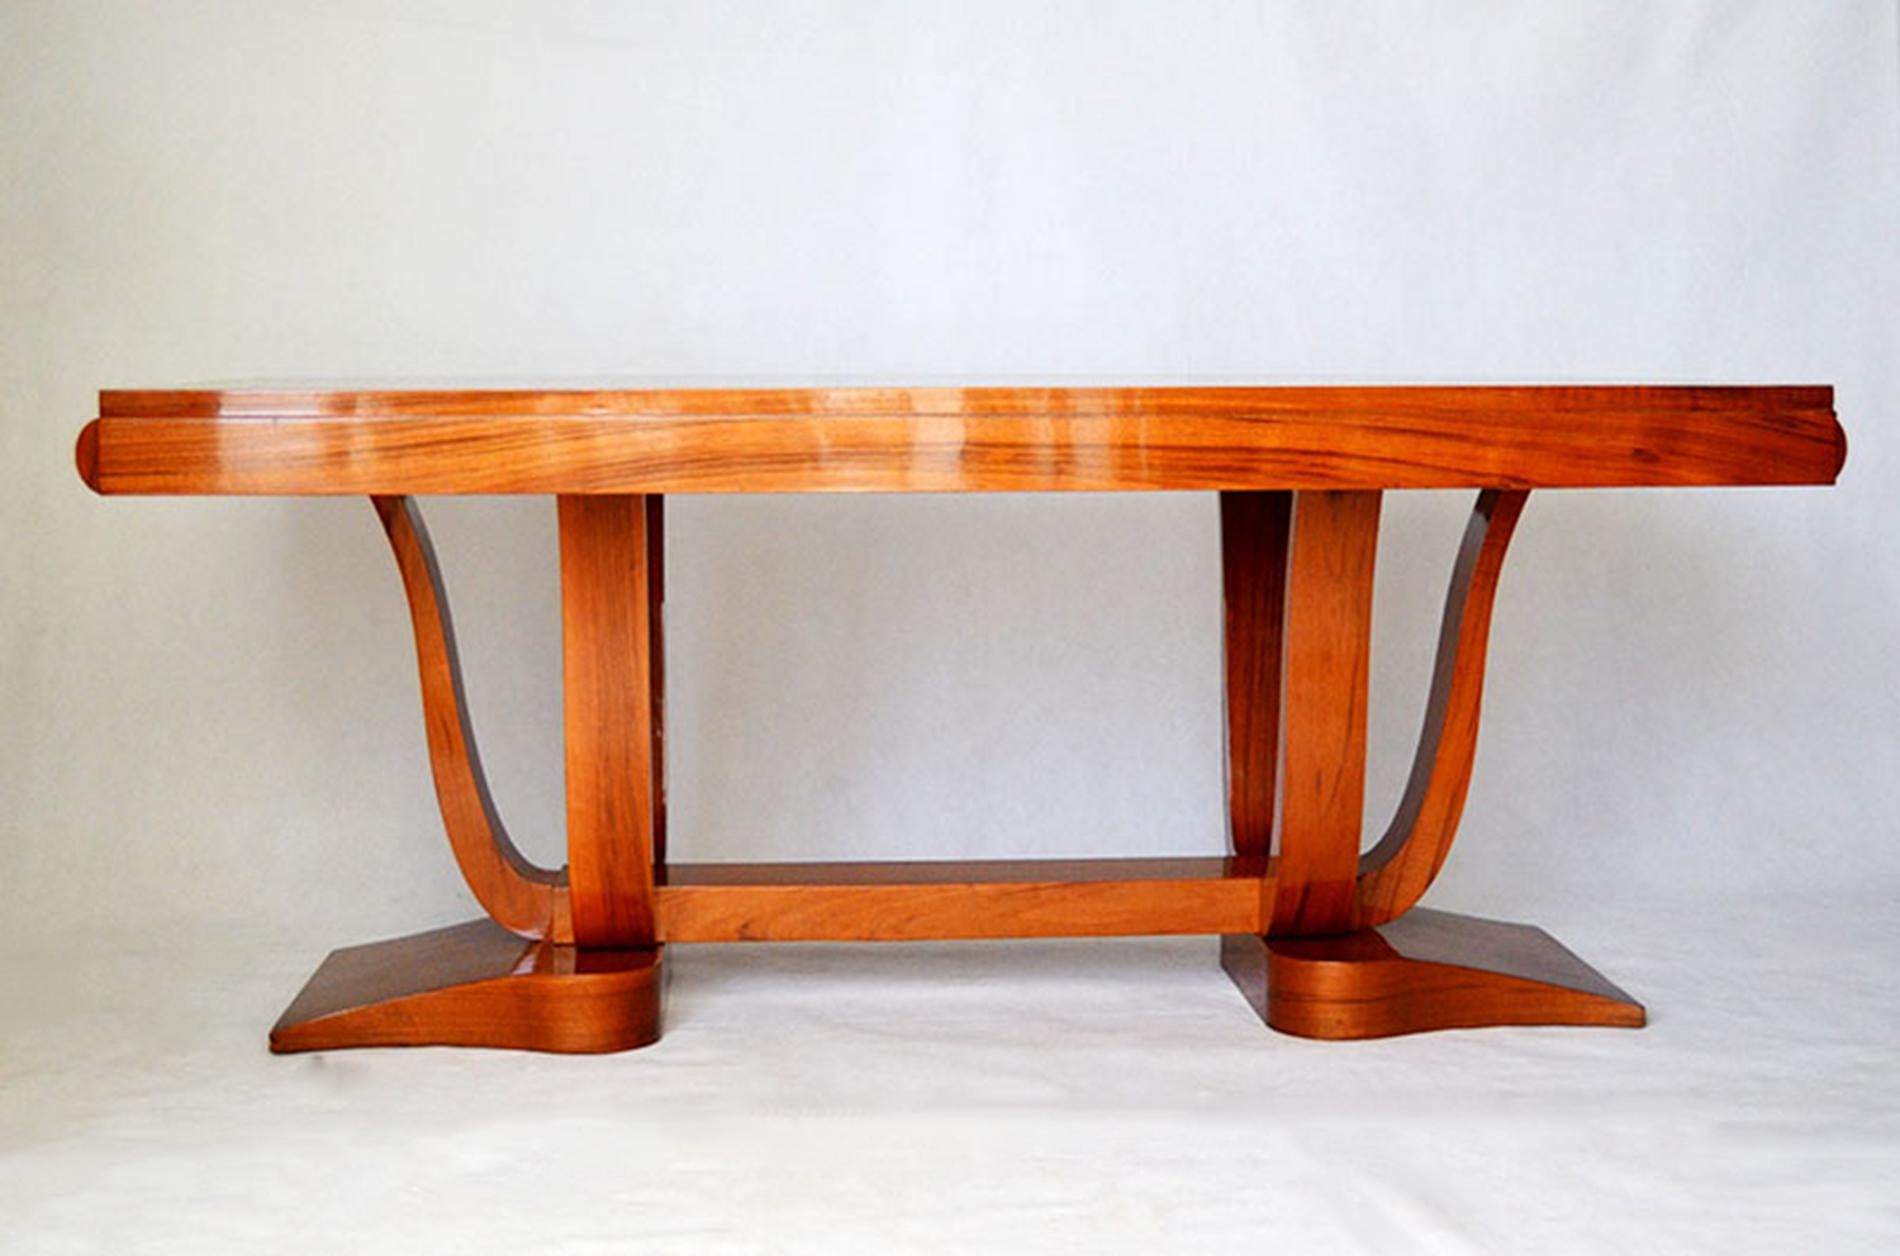 Large extensible Art Deco table in French walnut wood, France, 1930s
France,
circa 1930
Good vintage condition
Dimensions: 75 x 92 x 185 / 290 cm
Documentation: Attached 